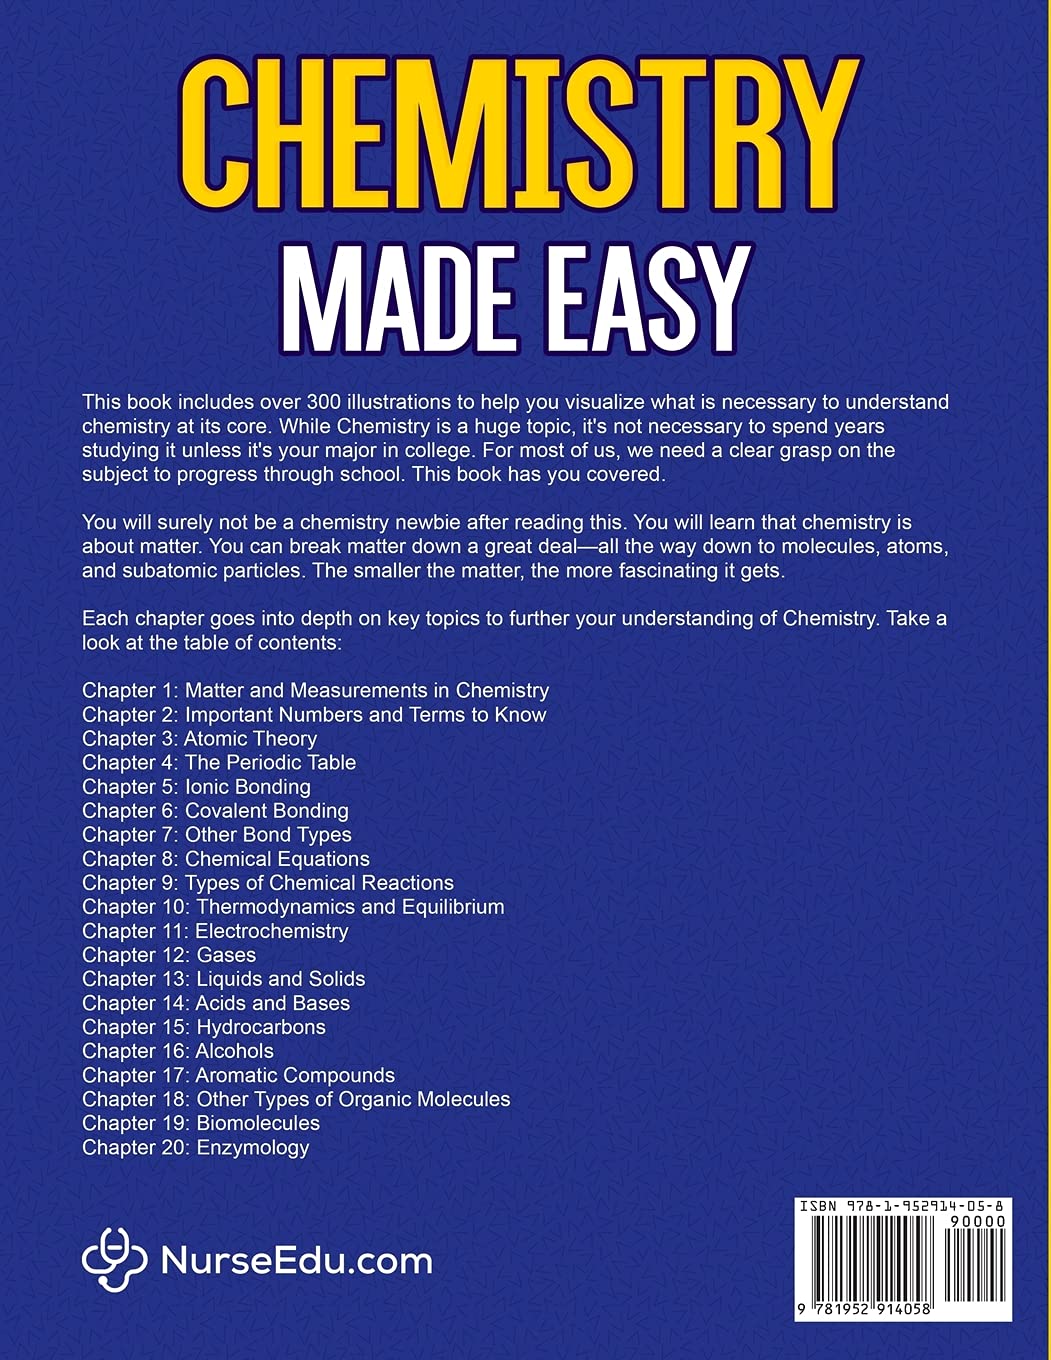 Chemistry Made Easy: An Illustrated Study Guide For Students To Easily Learn Chemistry